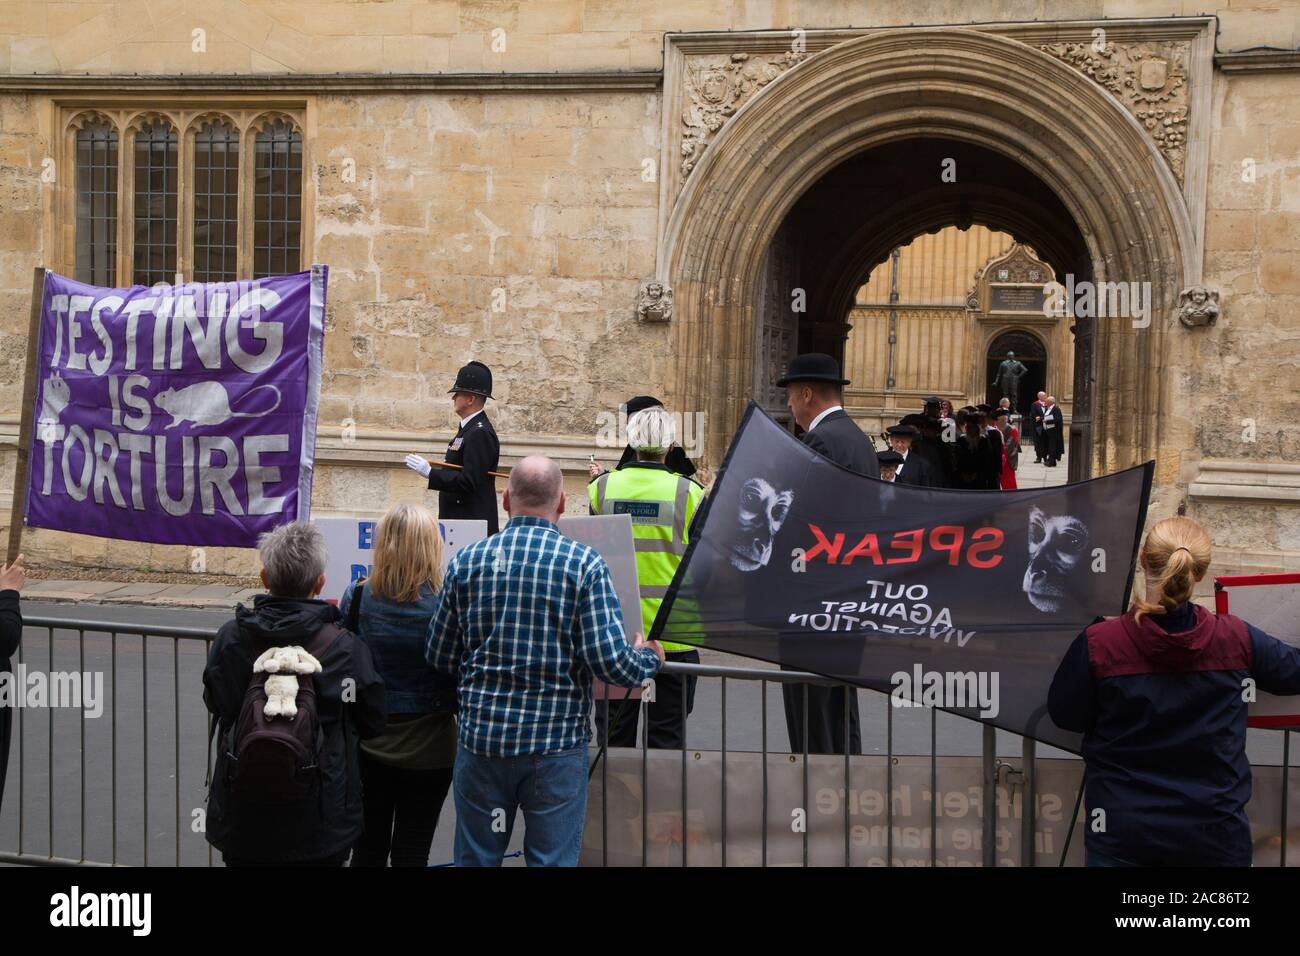 Animal rights demonstrators protest outside the Bodleian Library, Oxford as the Encaenium procession emerges from Old Schools Quad led by a policeman Stock Photo